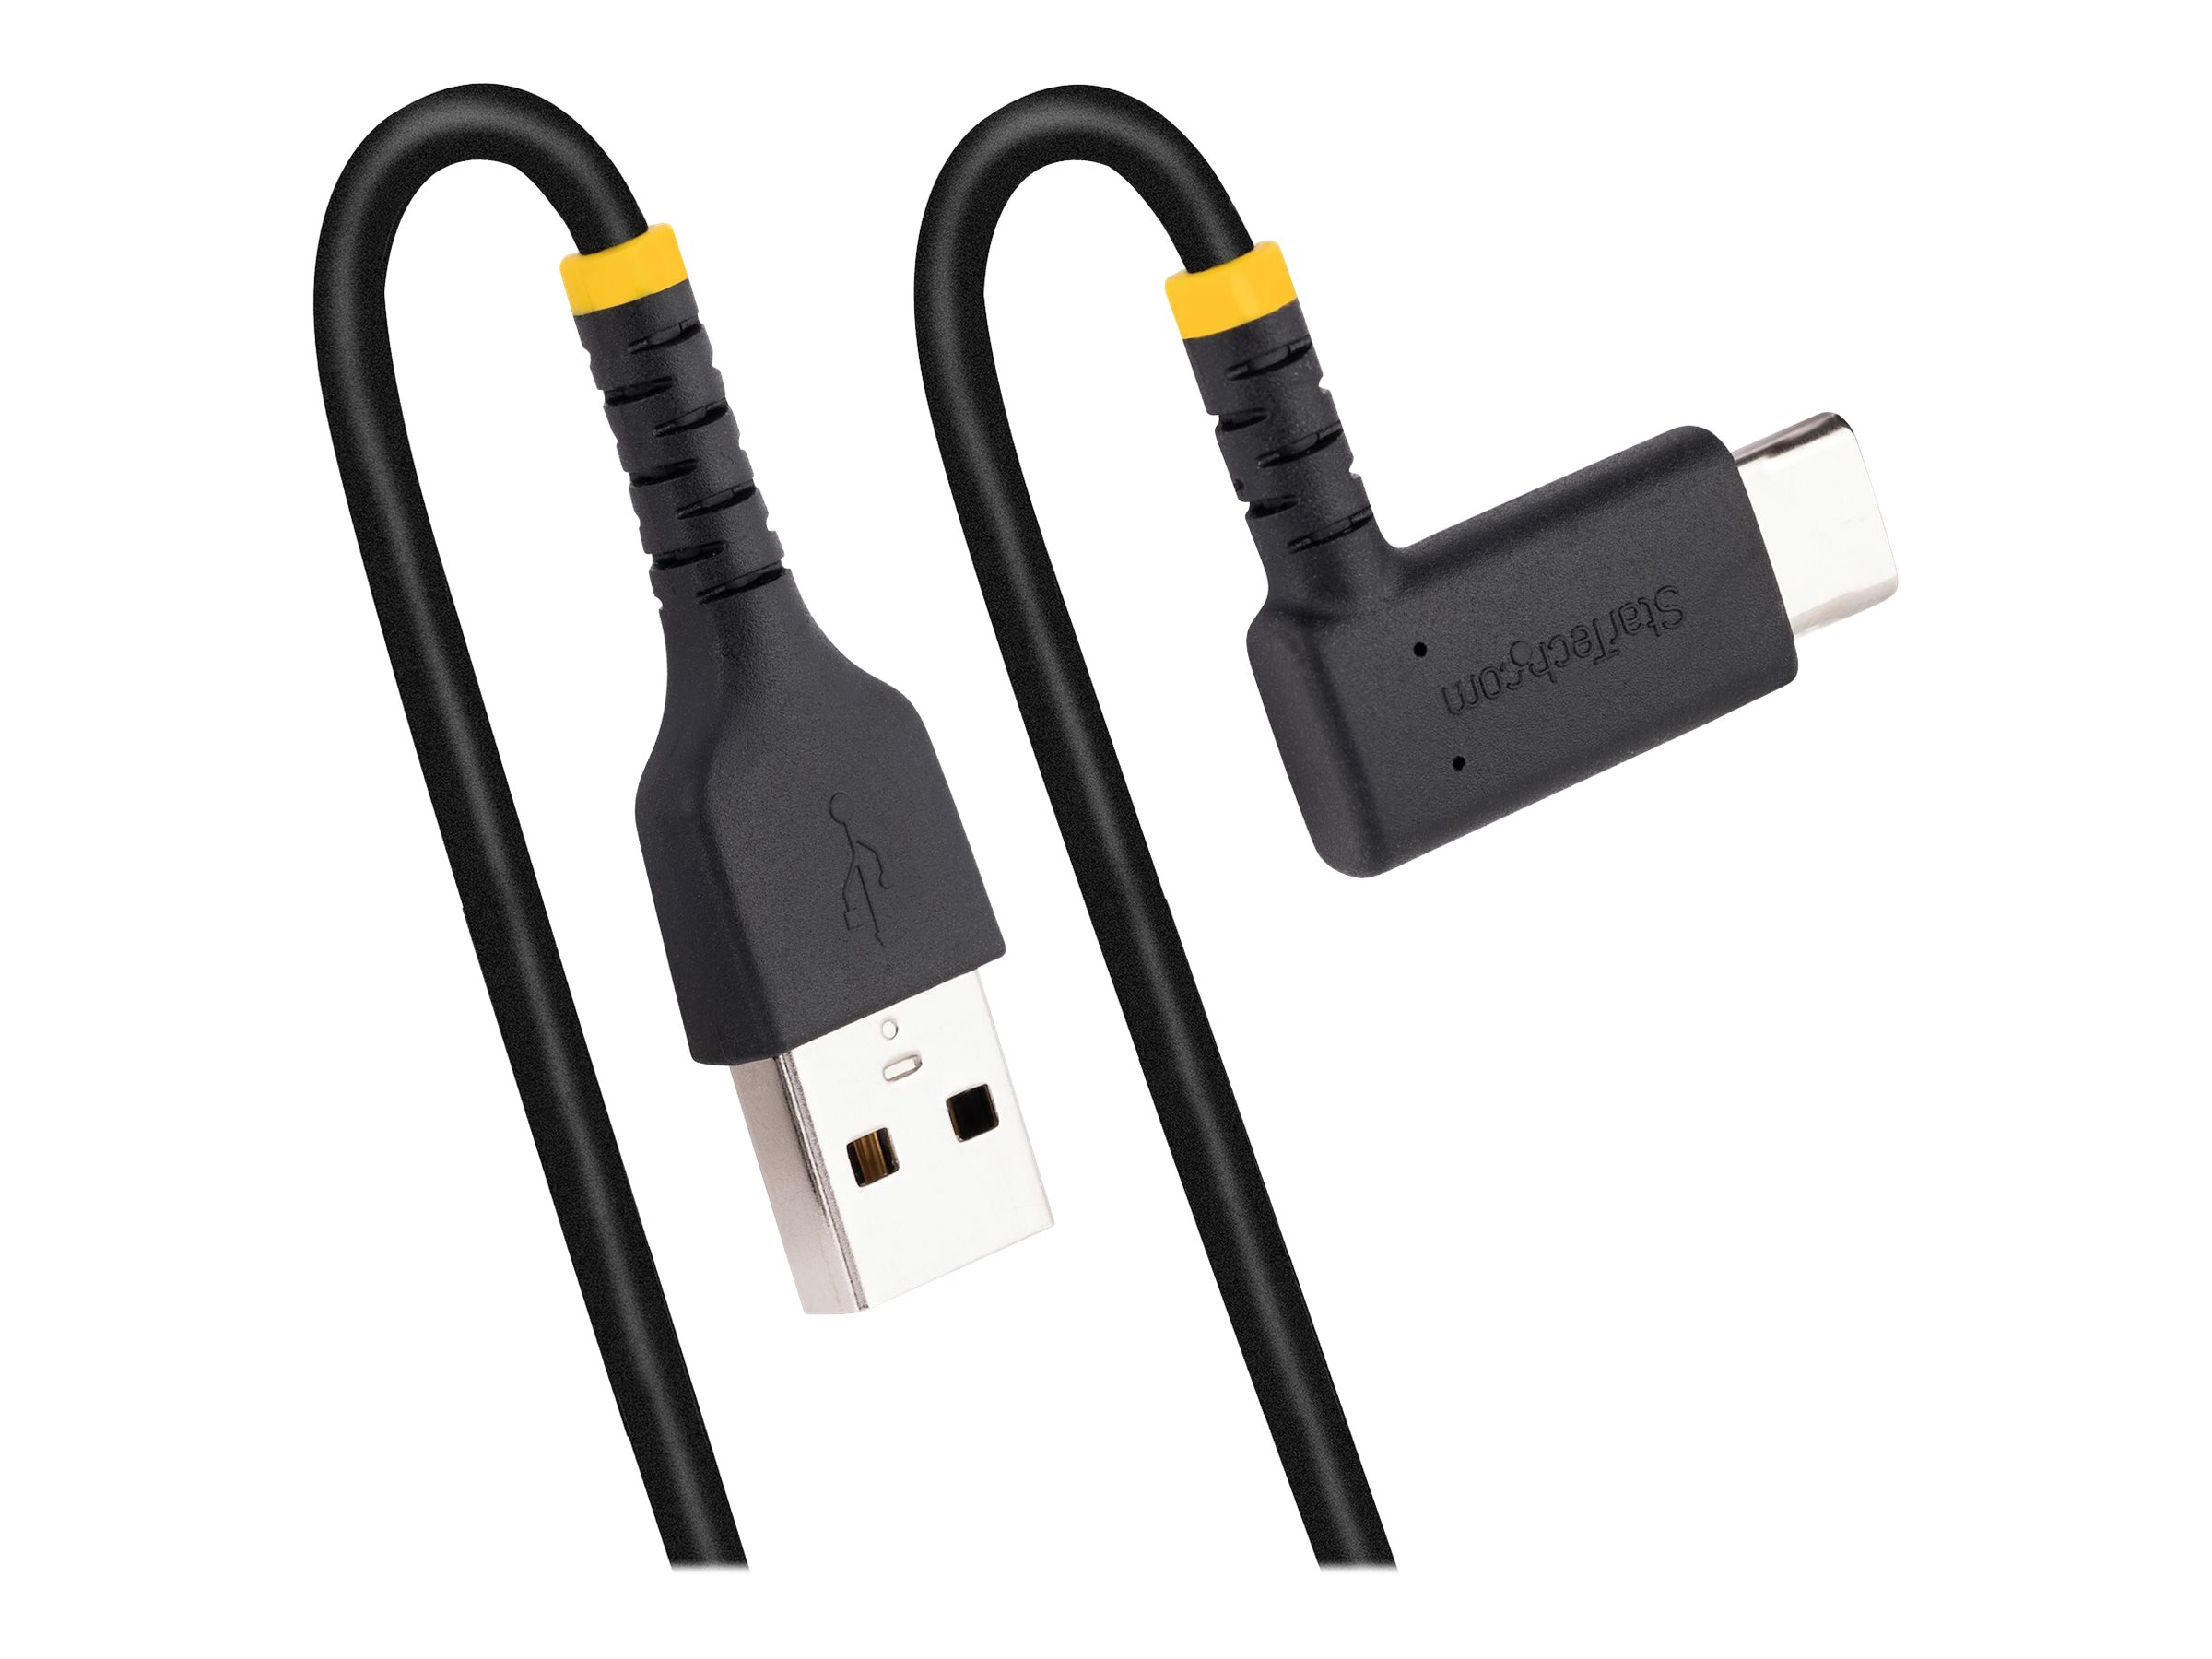 StarTech.com 1ft (30cm) USB A to C Charging Cable Right Angle, Heavy Duty Fast Charge USB-C Cable, USB 2.0 A to Type-C, Durable and Rugged Aramid Fiber, 3A, S20/iPad/Pixel - High Quality USB Charging Cord (R2ACR-30C-USB-CABLE) - Câble USB - USB (M) droit pour 24 pin USB-C (M) angle droit - Thunderbolt 3 / USB 2.0 - 3 A - 30 cm - noir - R2ACR-30C-USB-CABLE - Câbles USB